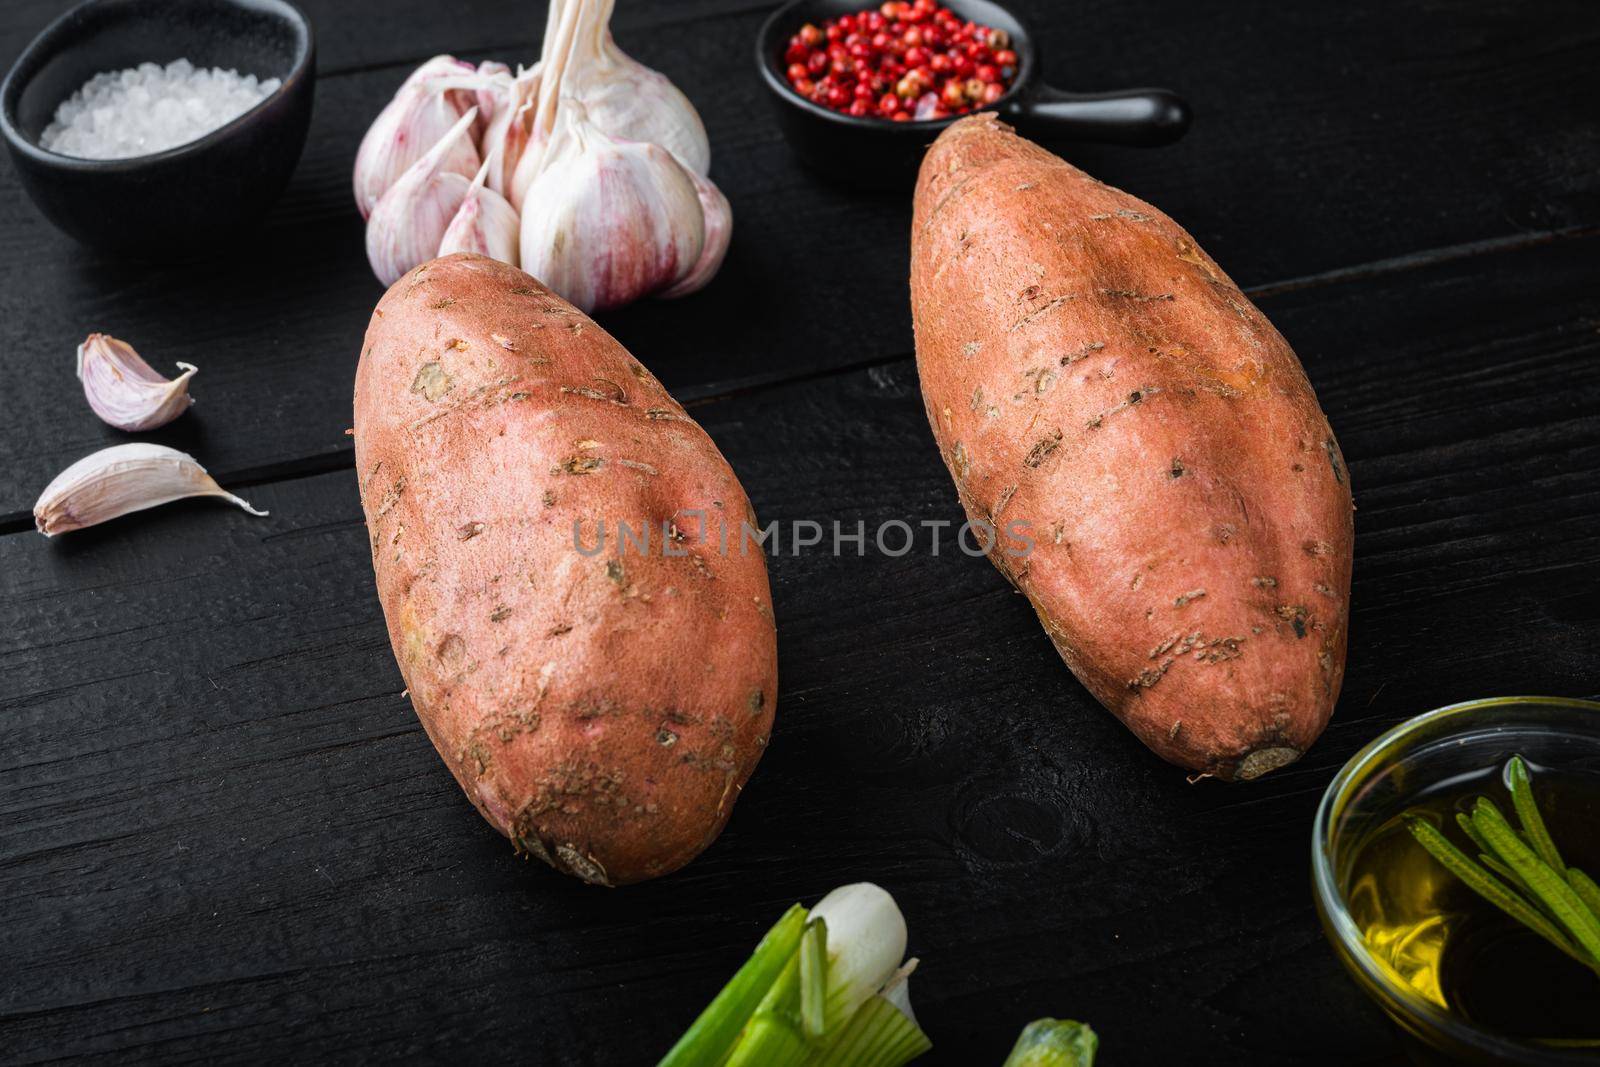 Sweet potato or batat with ingredients, on black wooden background by Ilianesolenyi